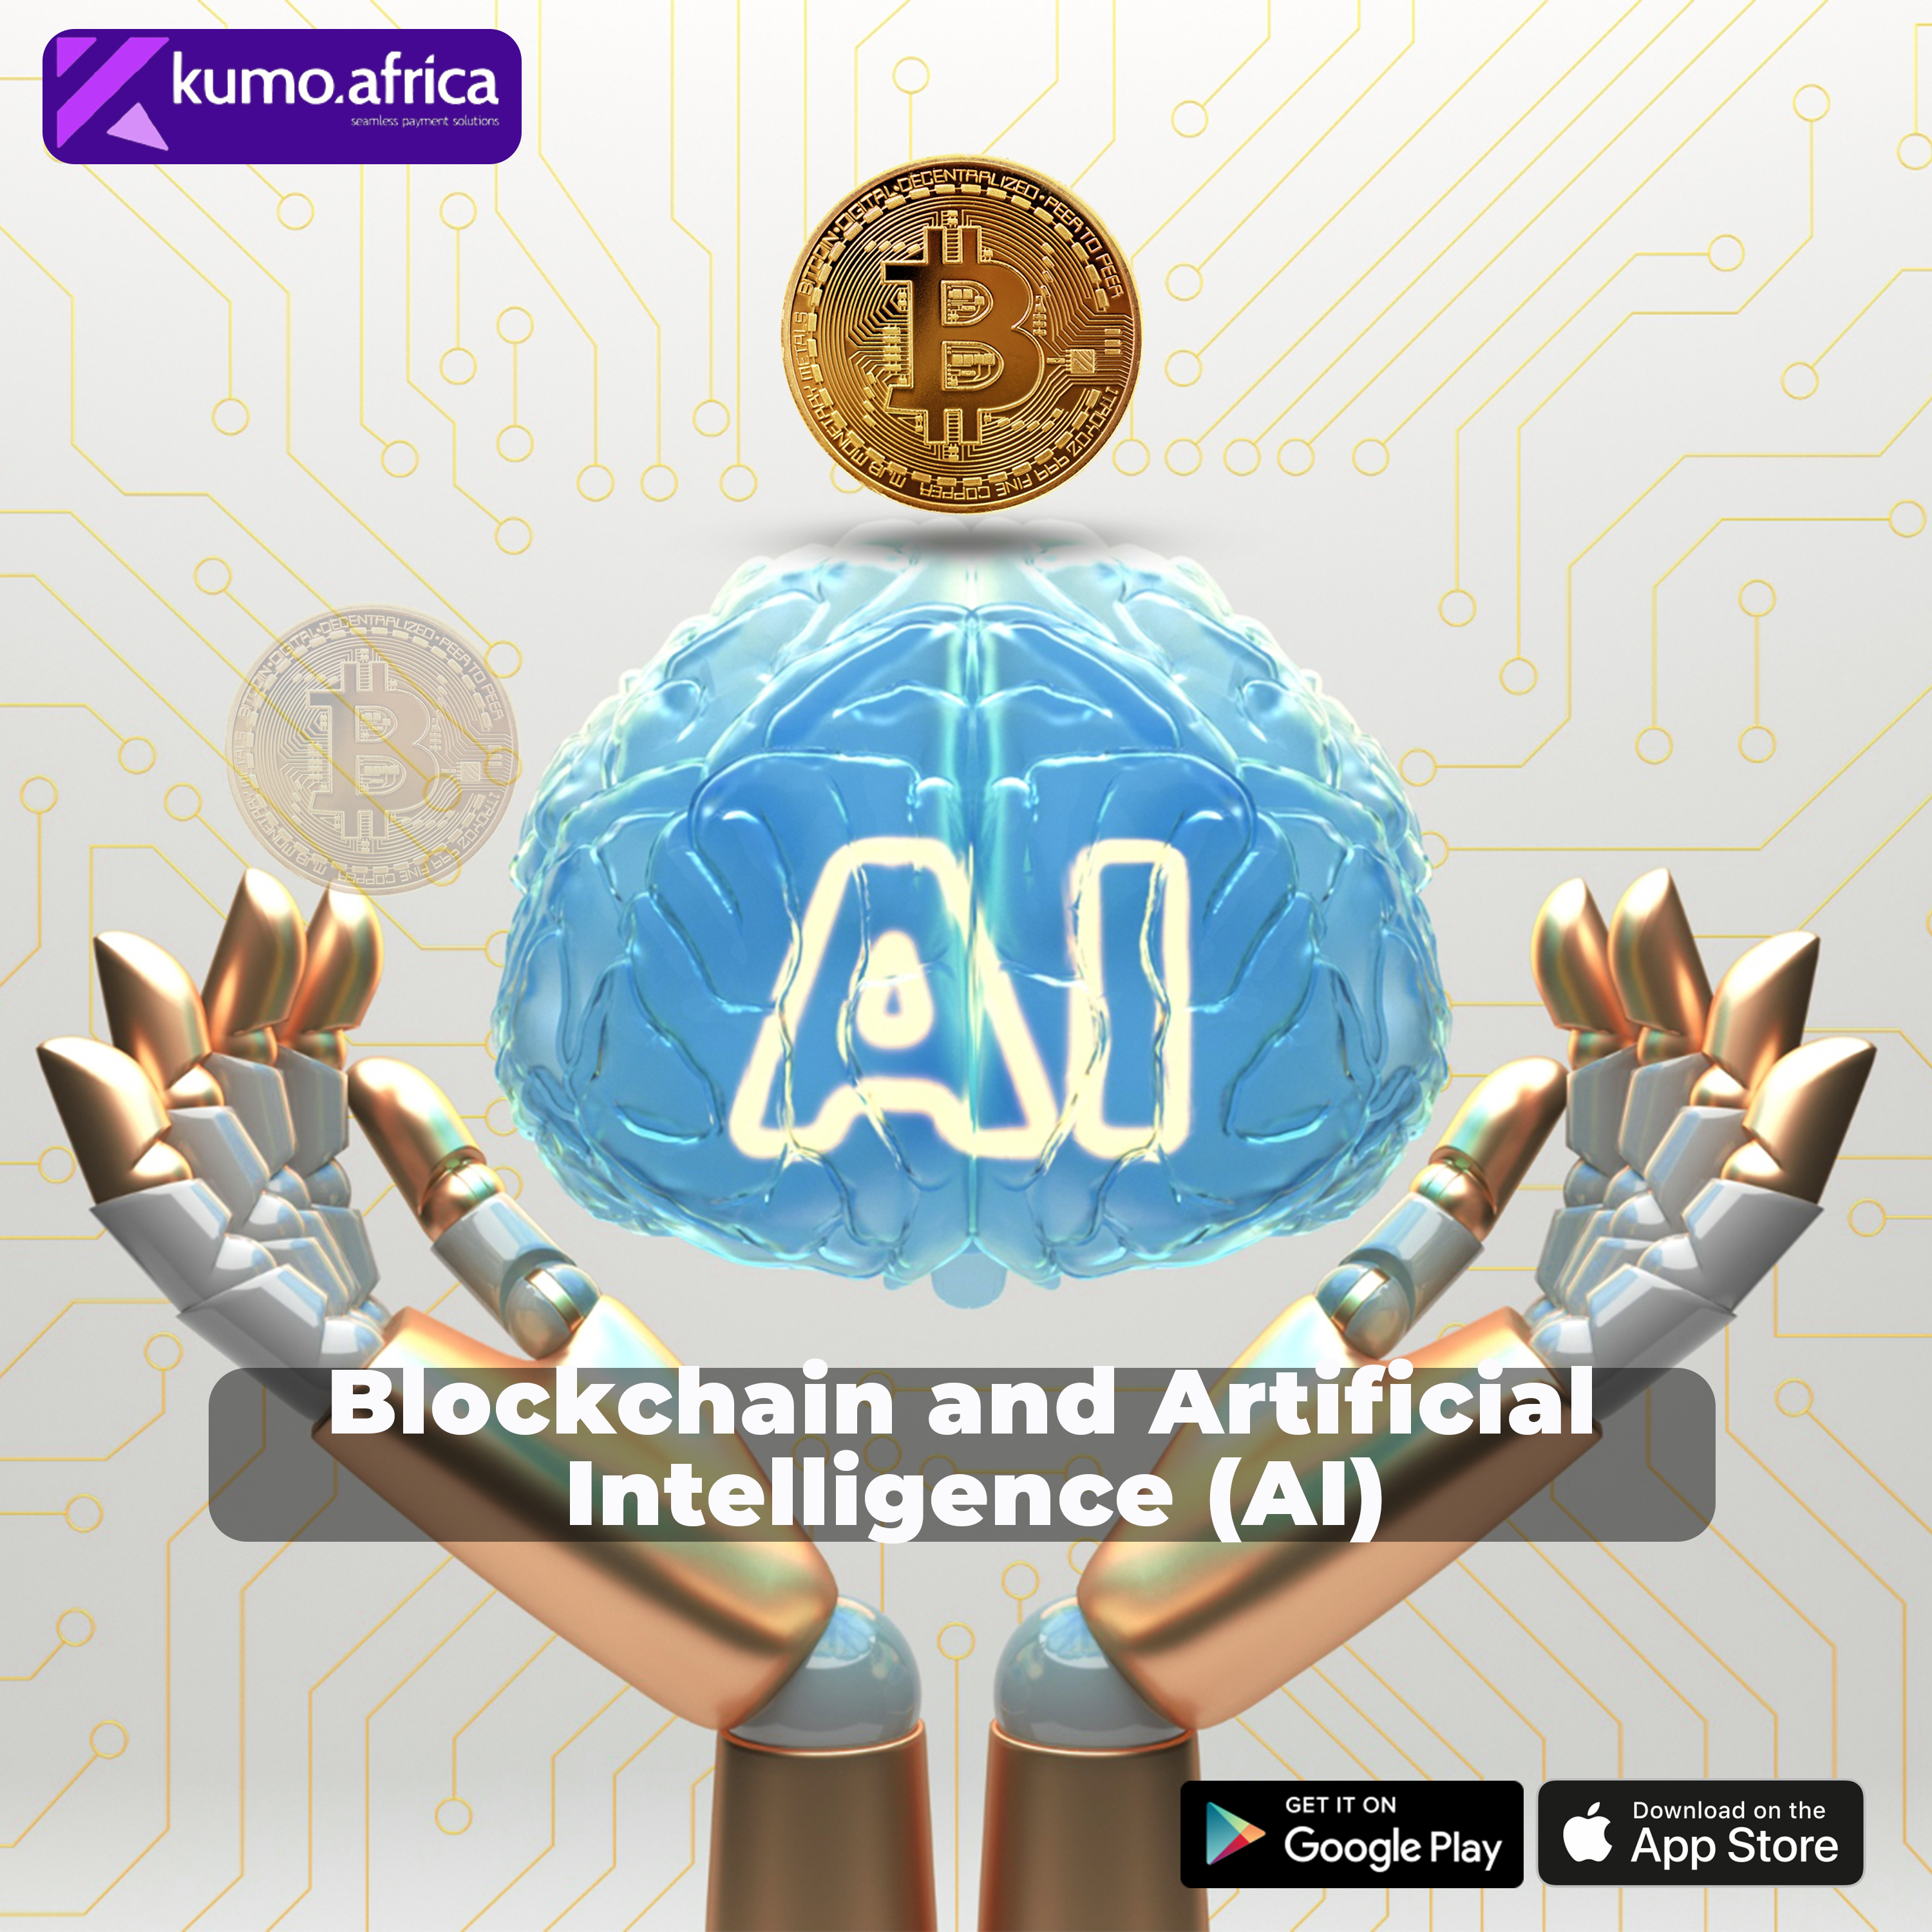 Blockchain technology and Artificial intelligence